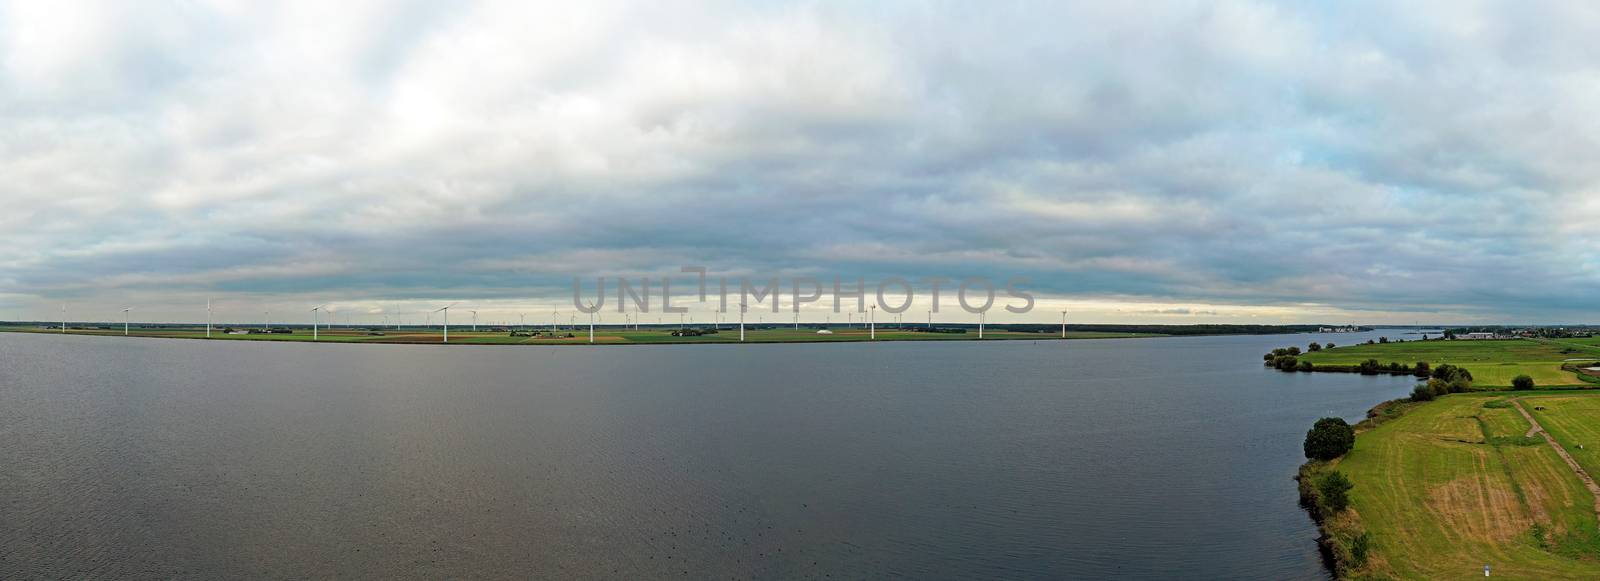 Aerial panorama from a wind farm at the Eenmeer in the Netherlands